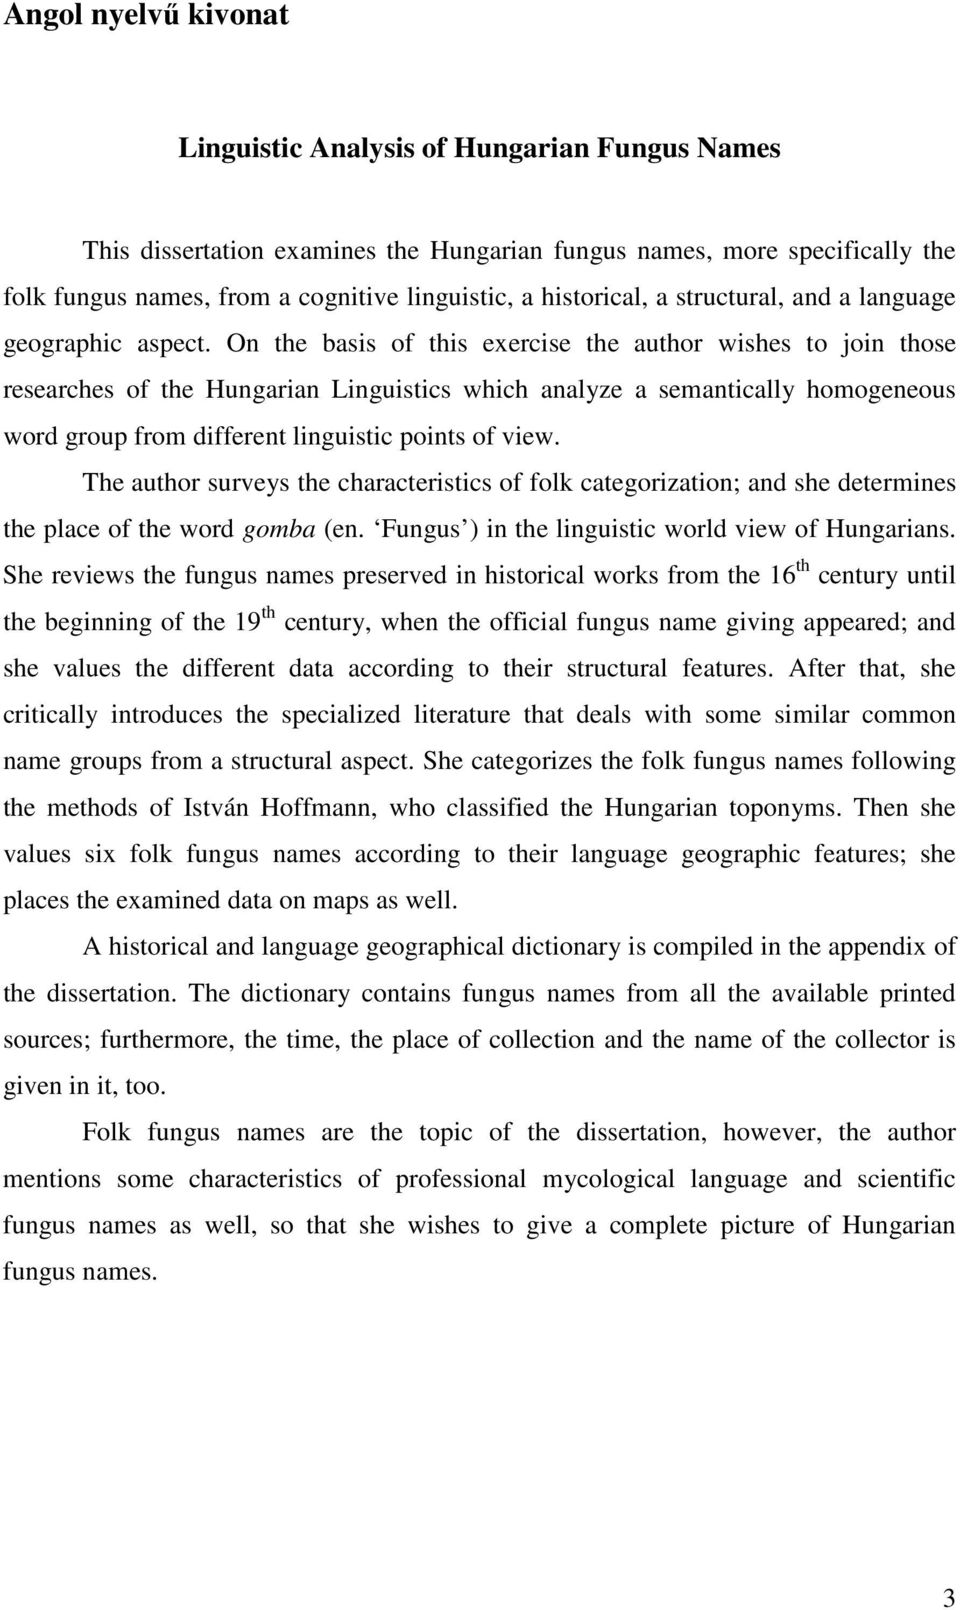 On the basis of this exercise the author wishes to join those researches of the Hungarian Linguistics which analyze a semantically homogeneous word group from different linguistic points of view.